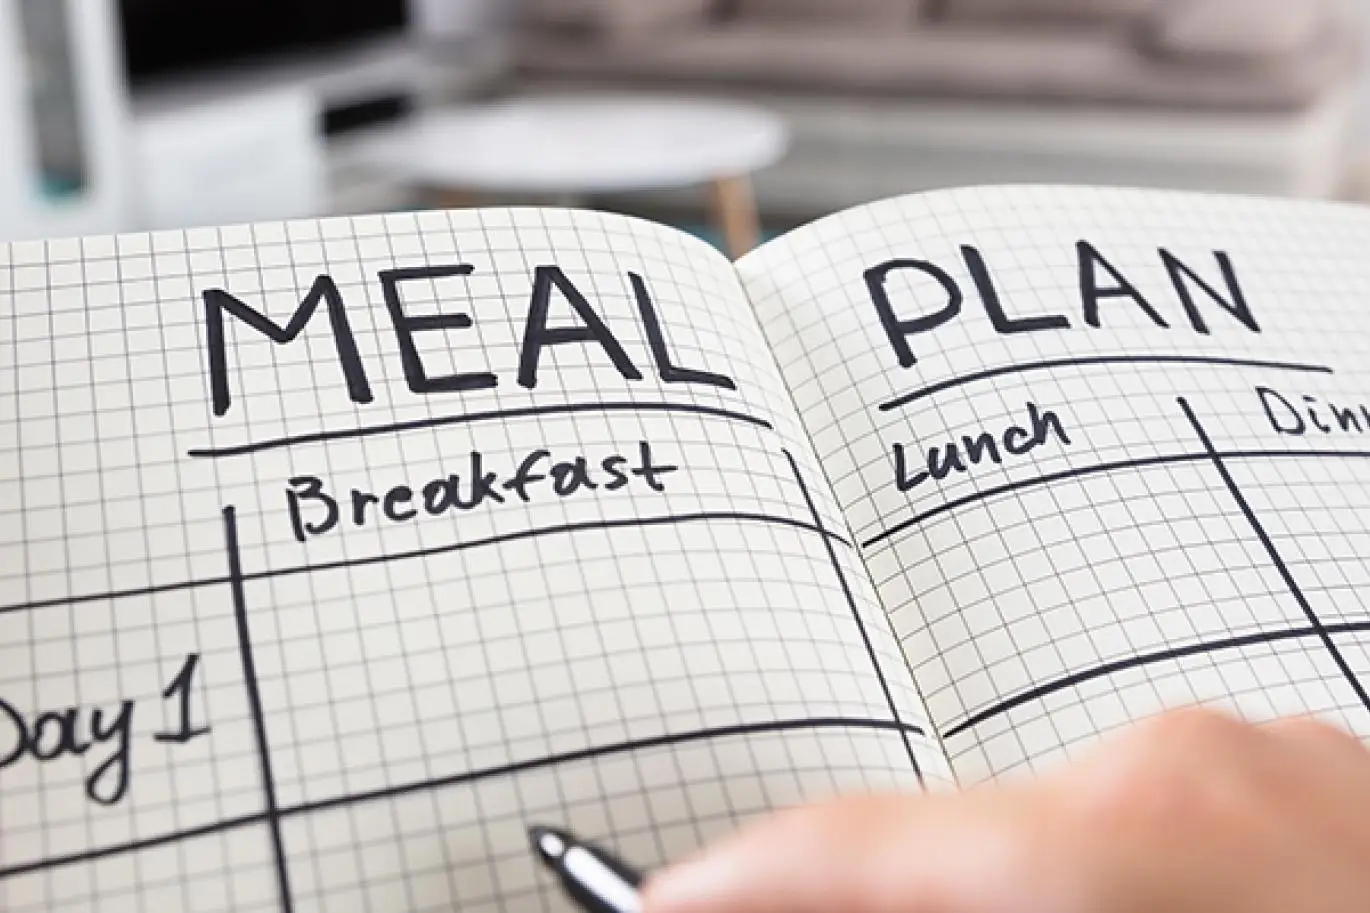 7-Day Healthy and Balanced Meal Plan Ideas: Recipes & Prep